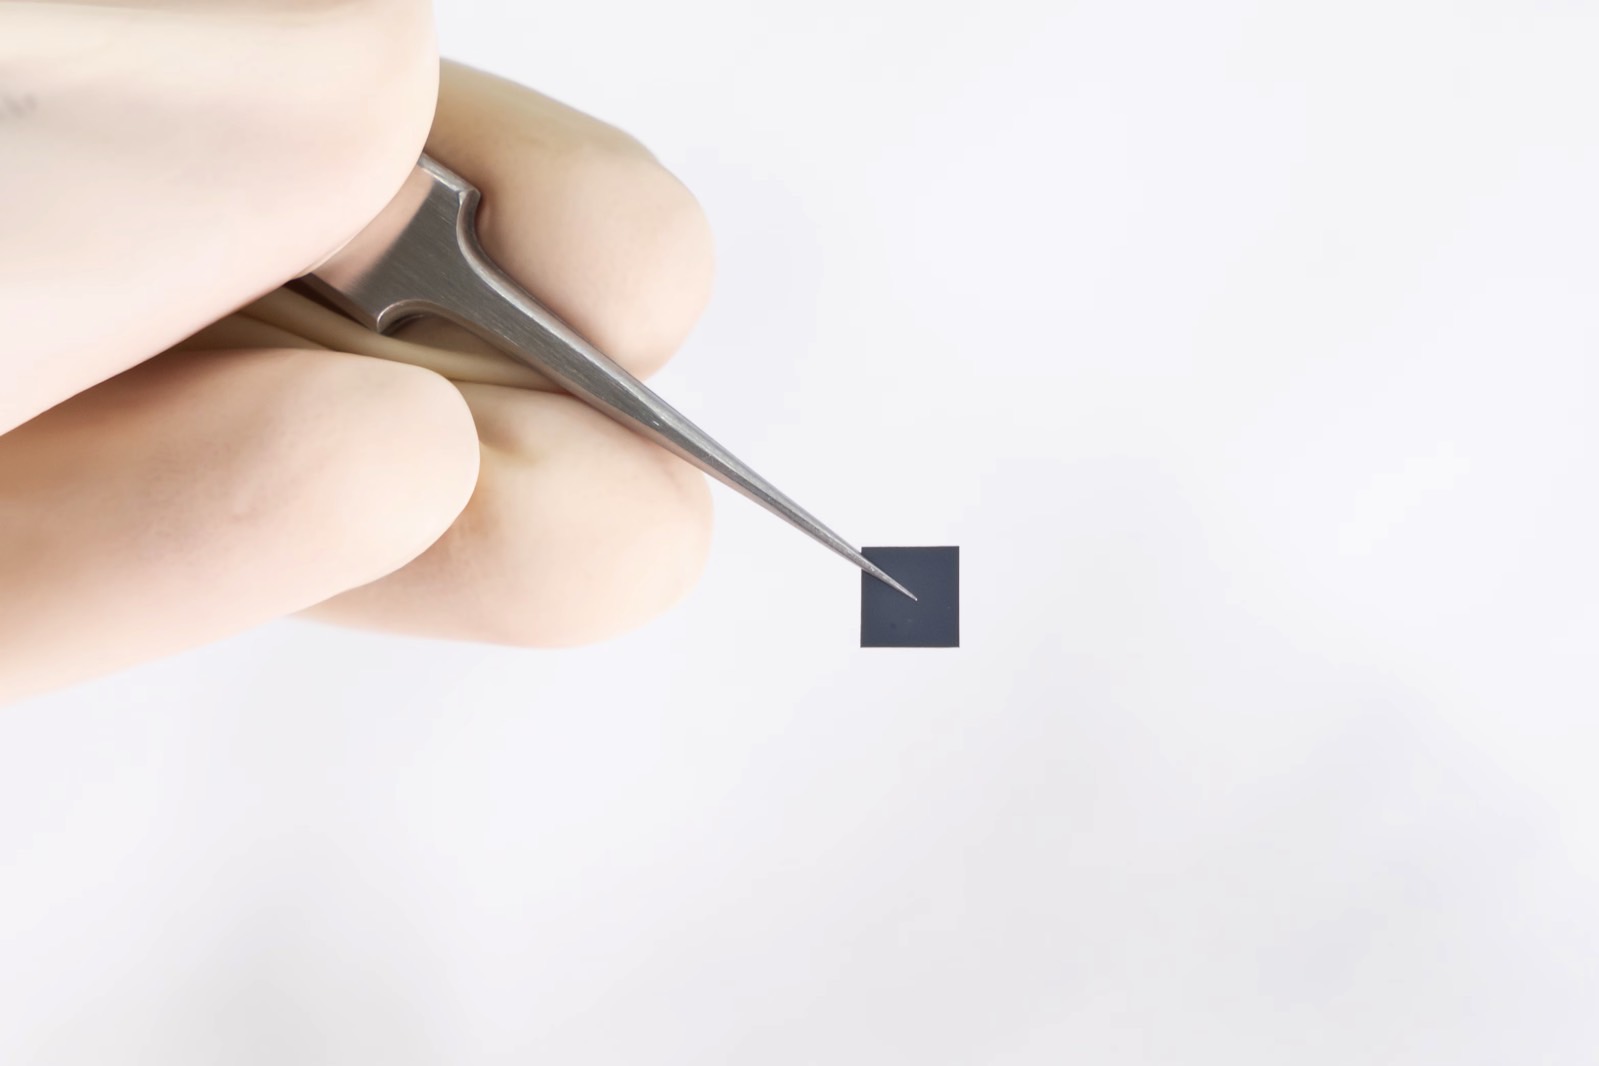 TDK's new ceramic solid-state battery for wearable devices.